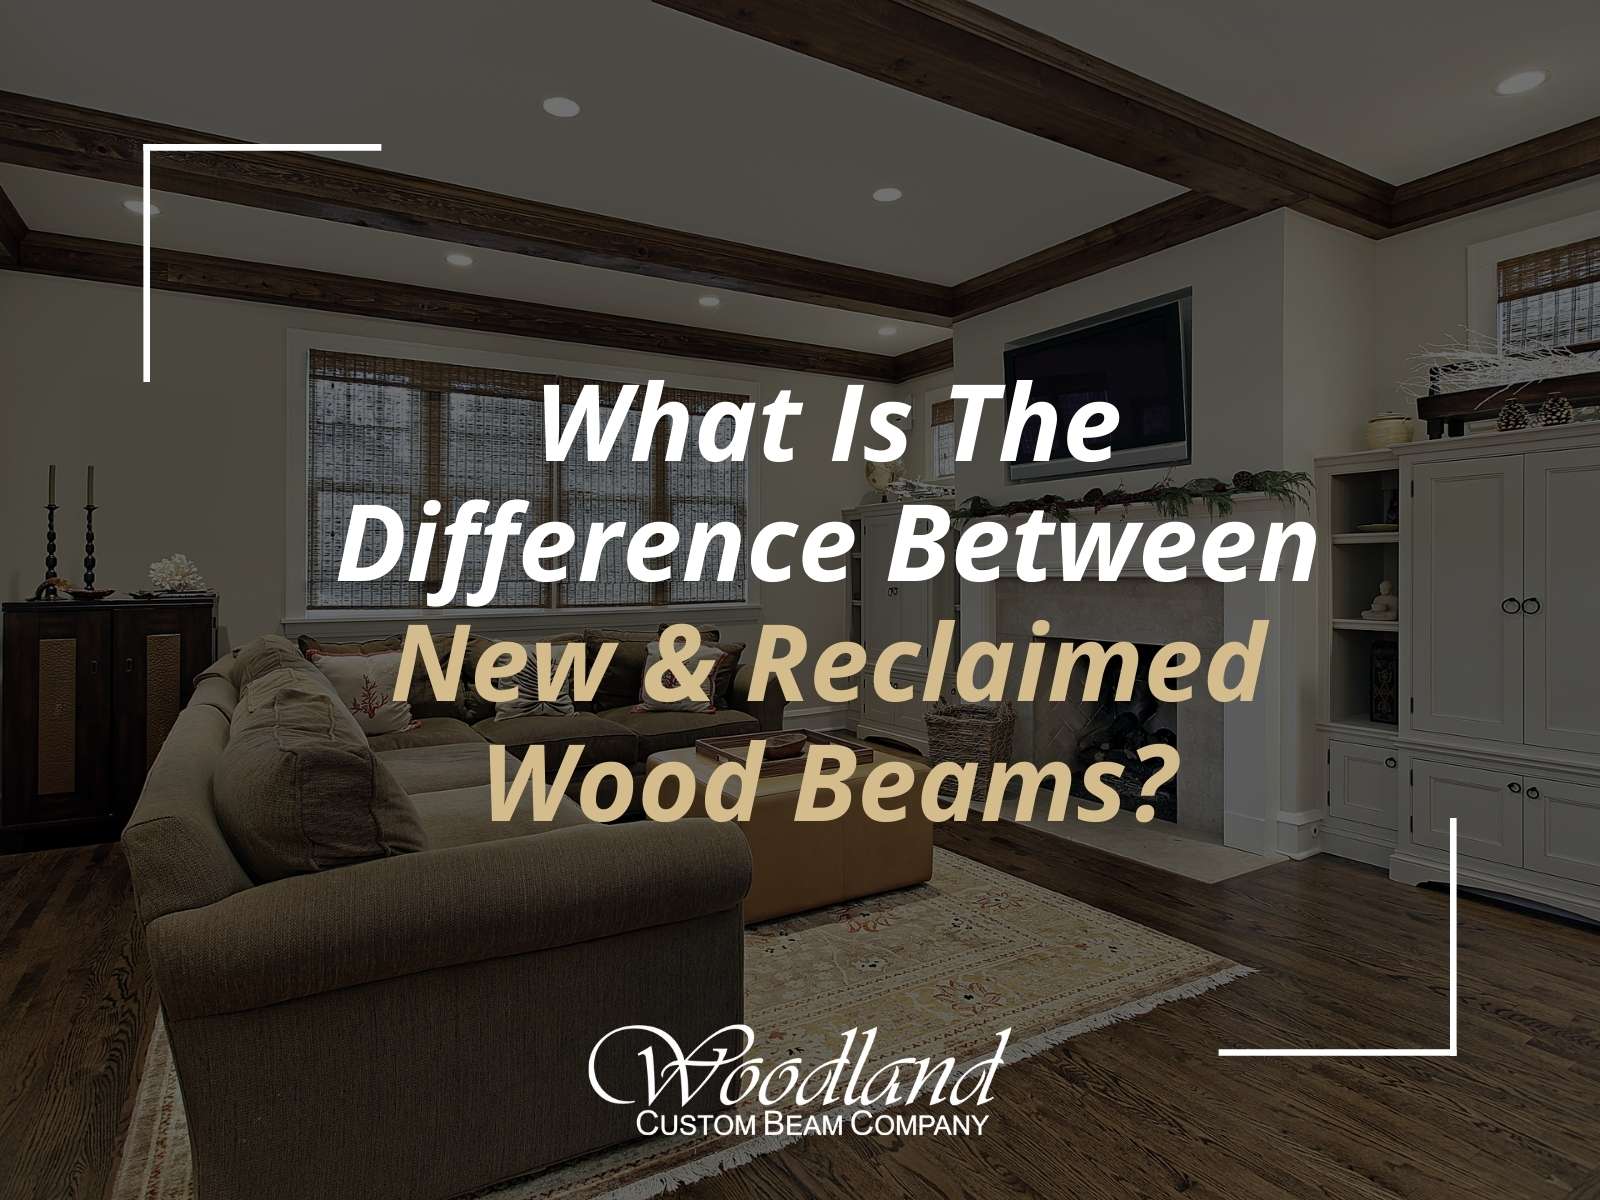 What Is The Difference Between New & Reclaimed Wood Beams